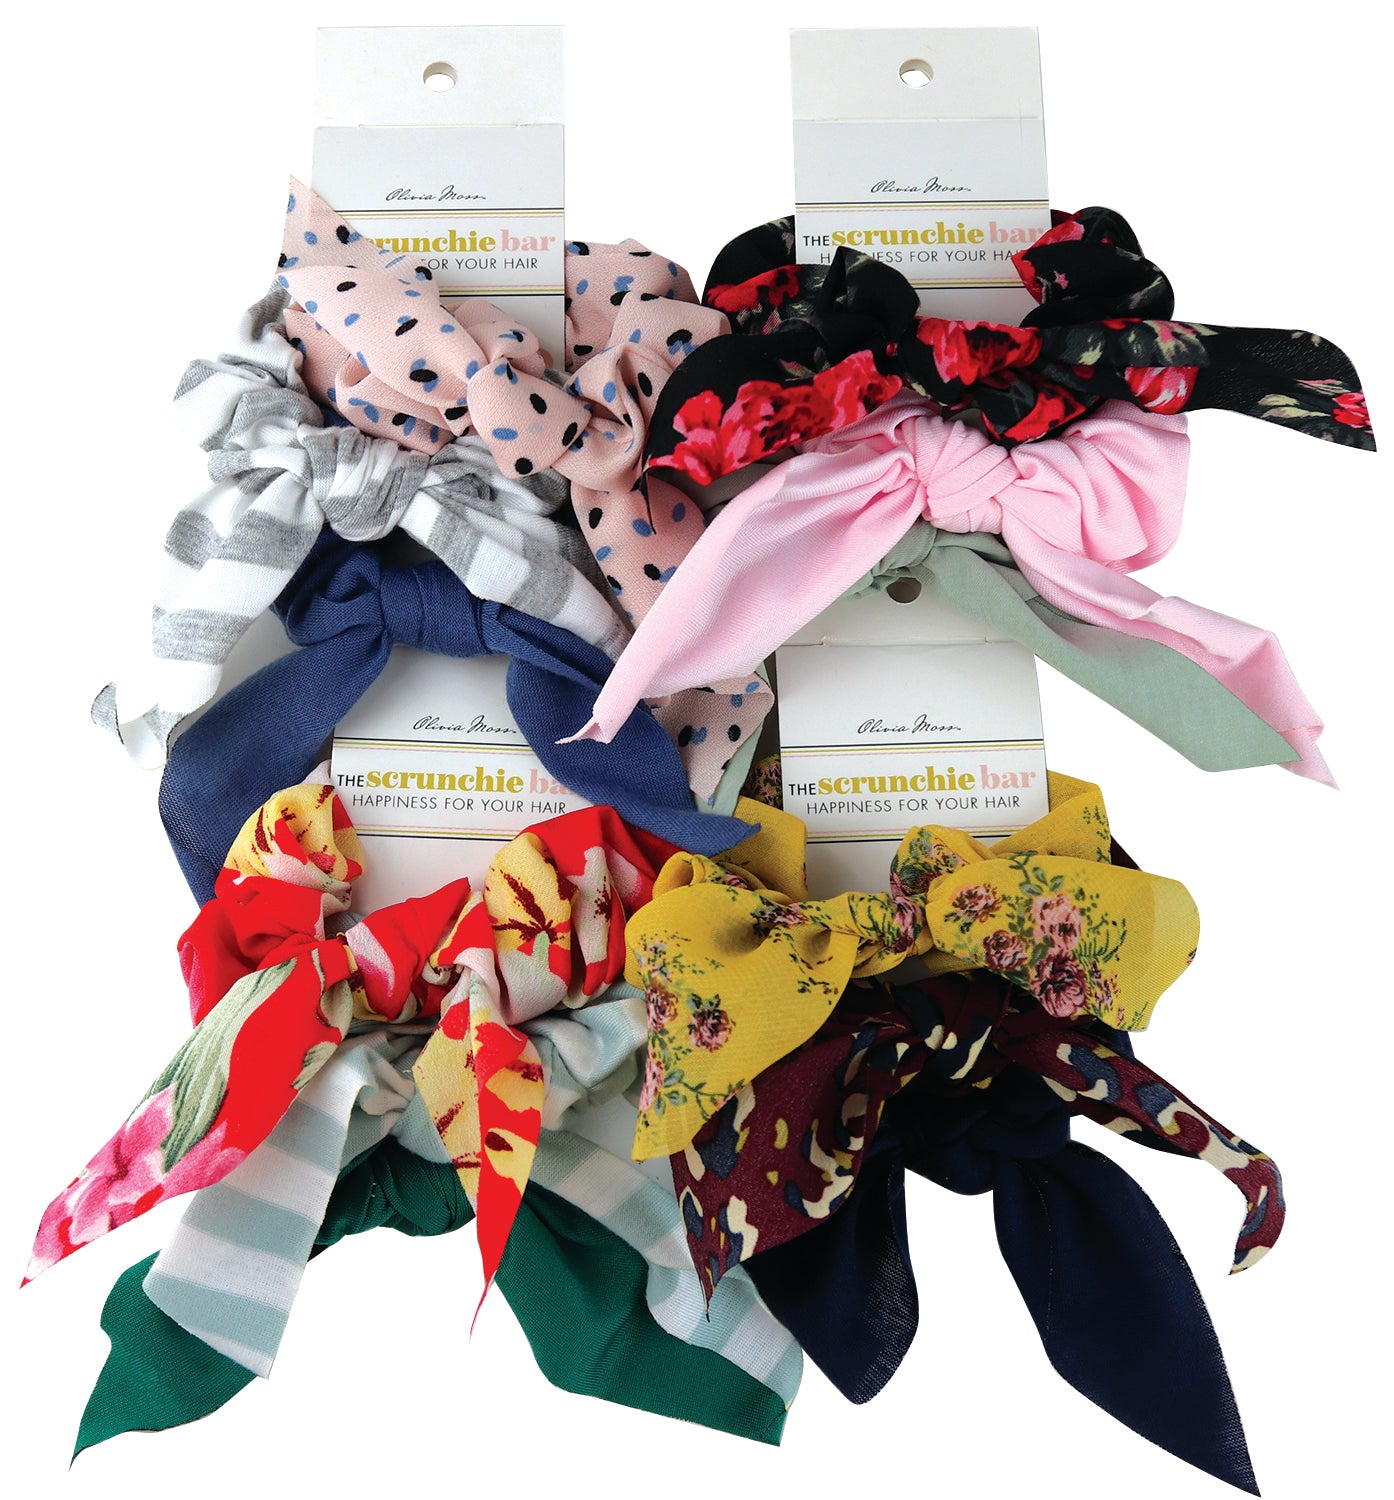 The Short Tail Scrunchie 3 pack by Olivia Moss® Phoenix Nationale